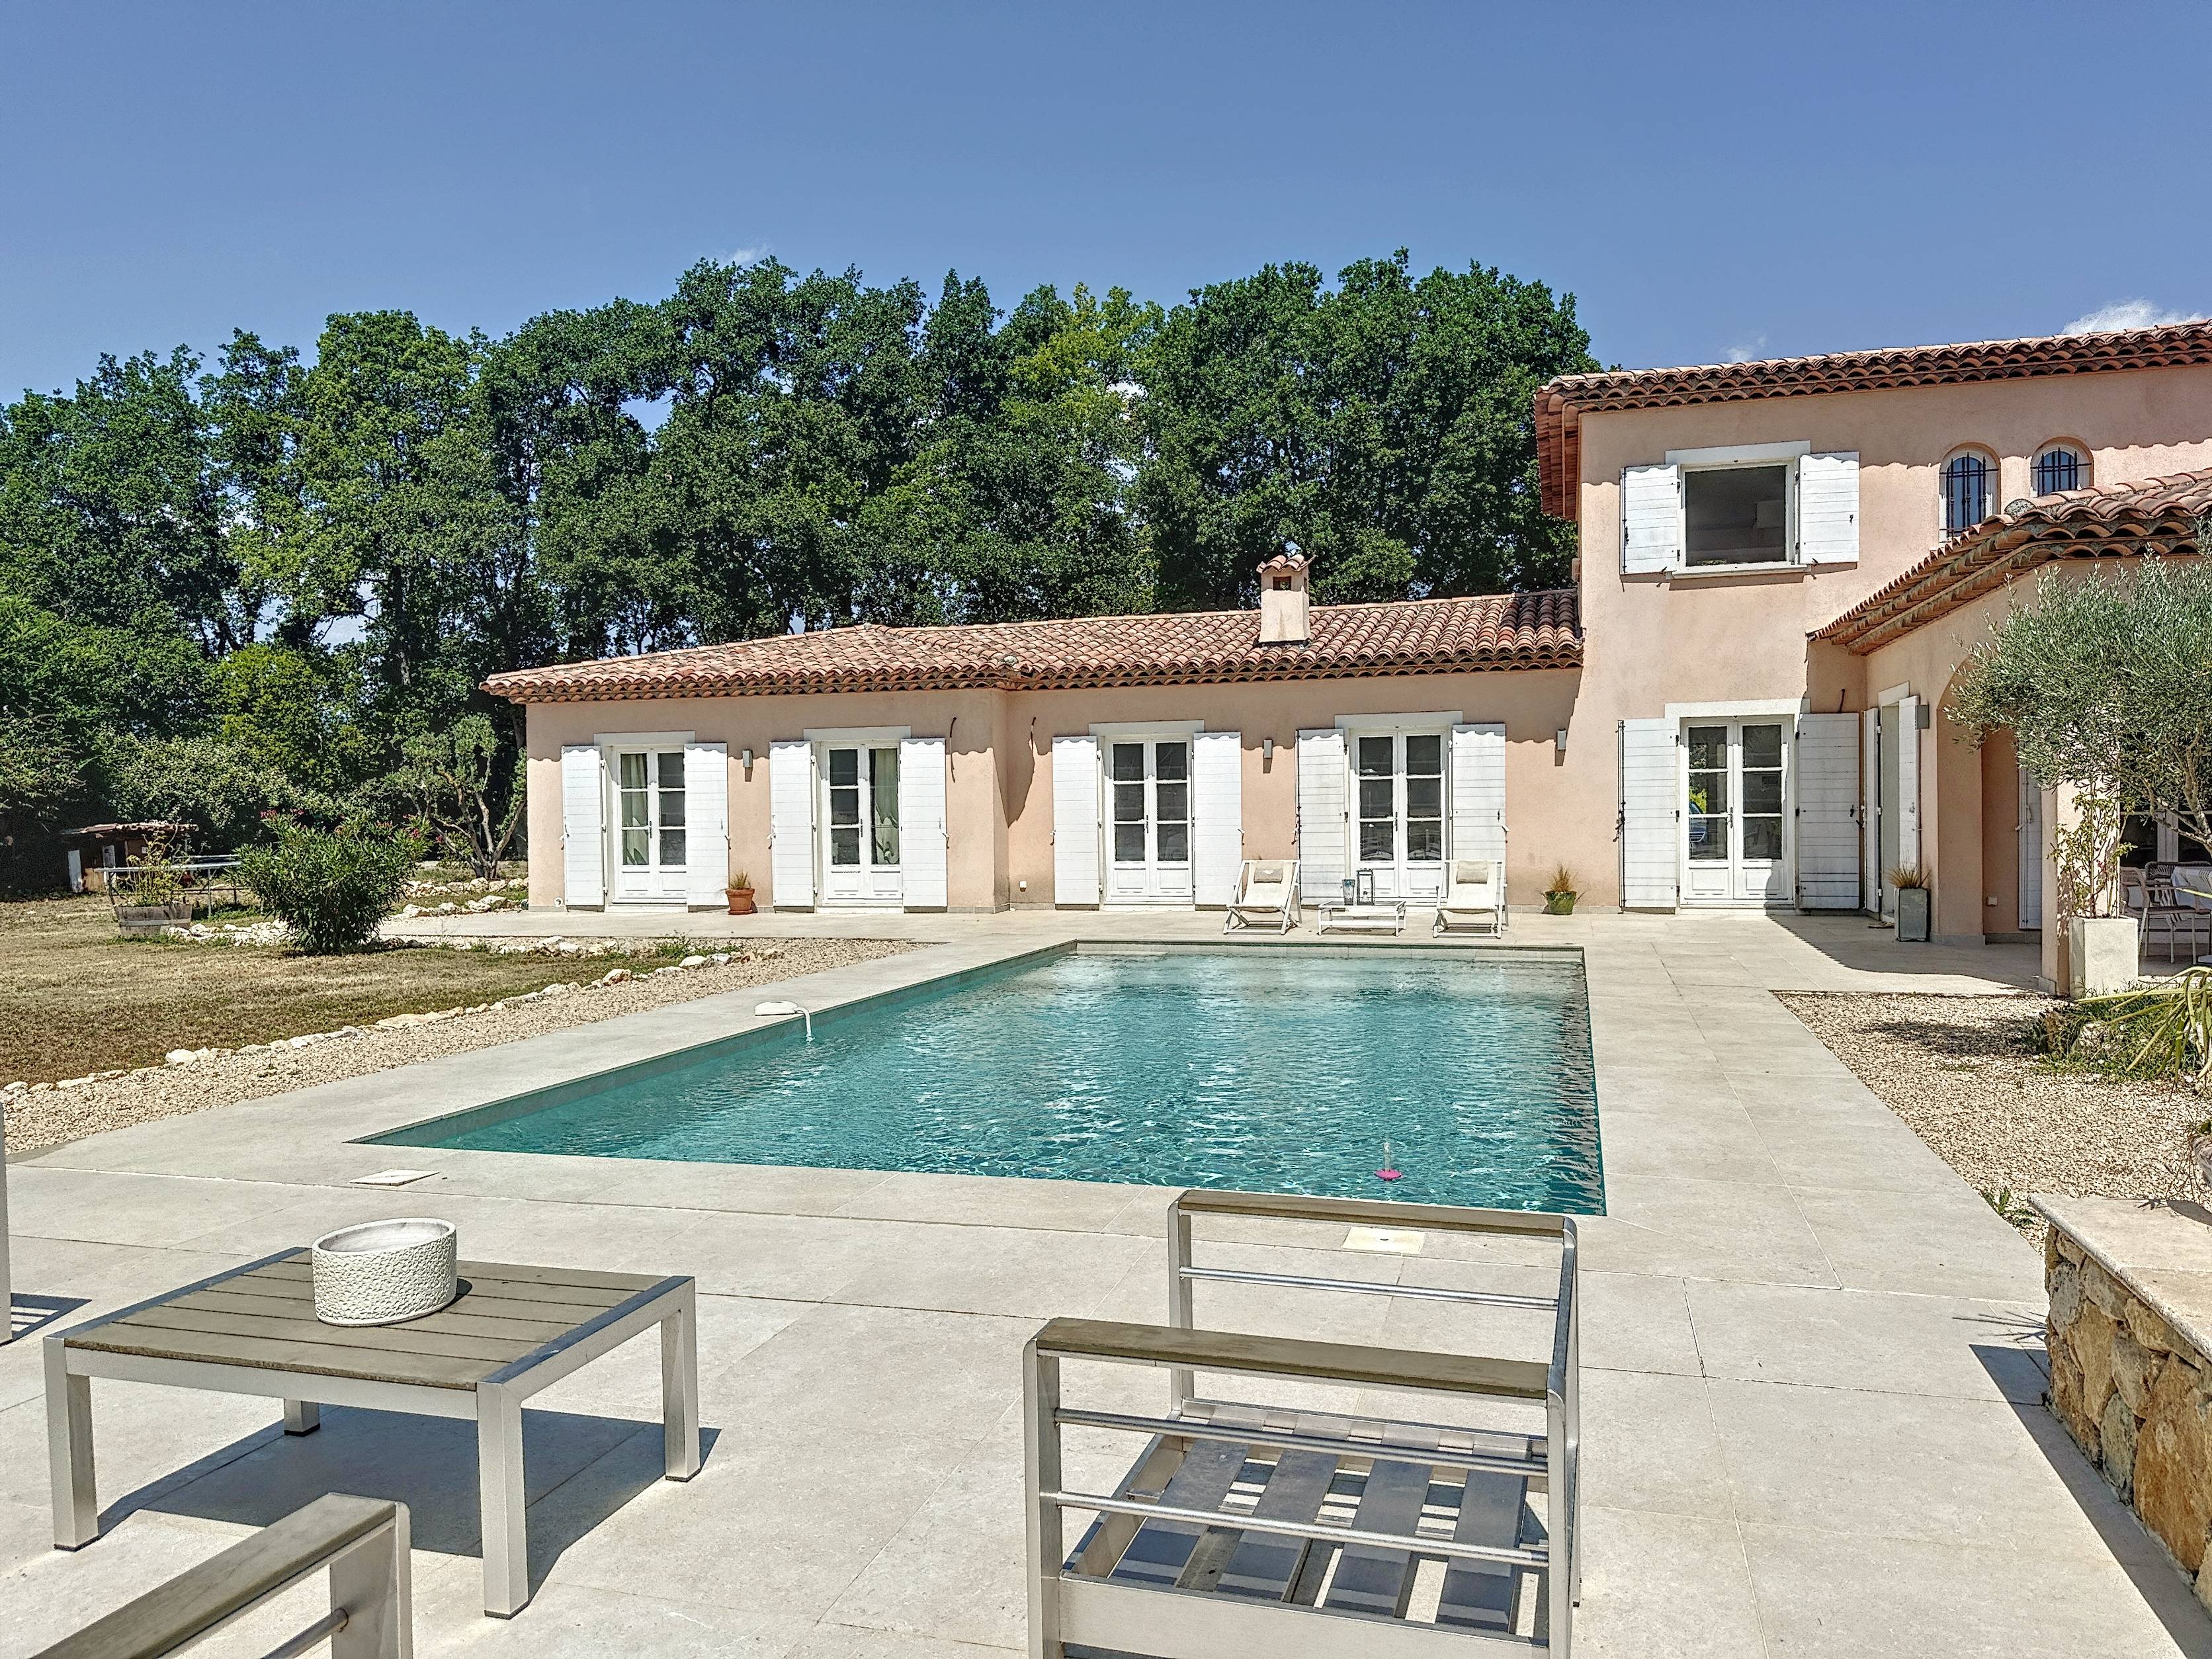 Private & Elegant South of France Retreat - Priced to Sell!